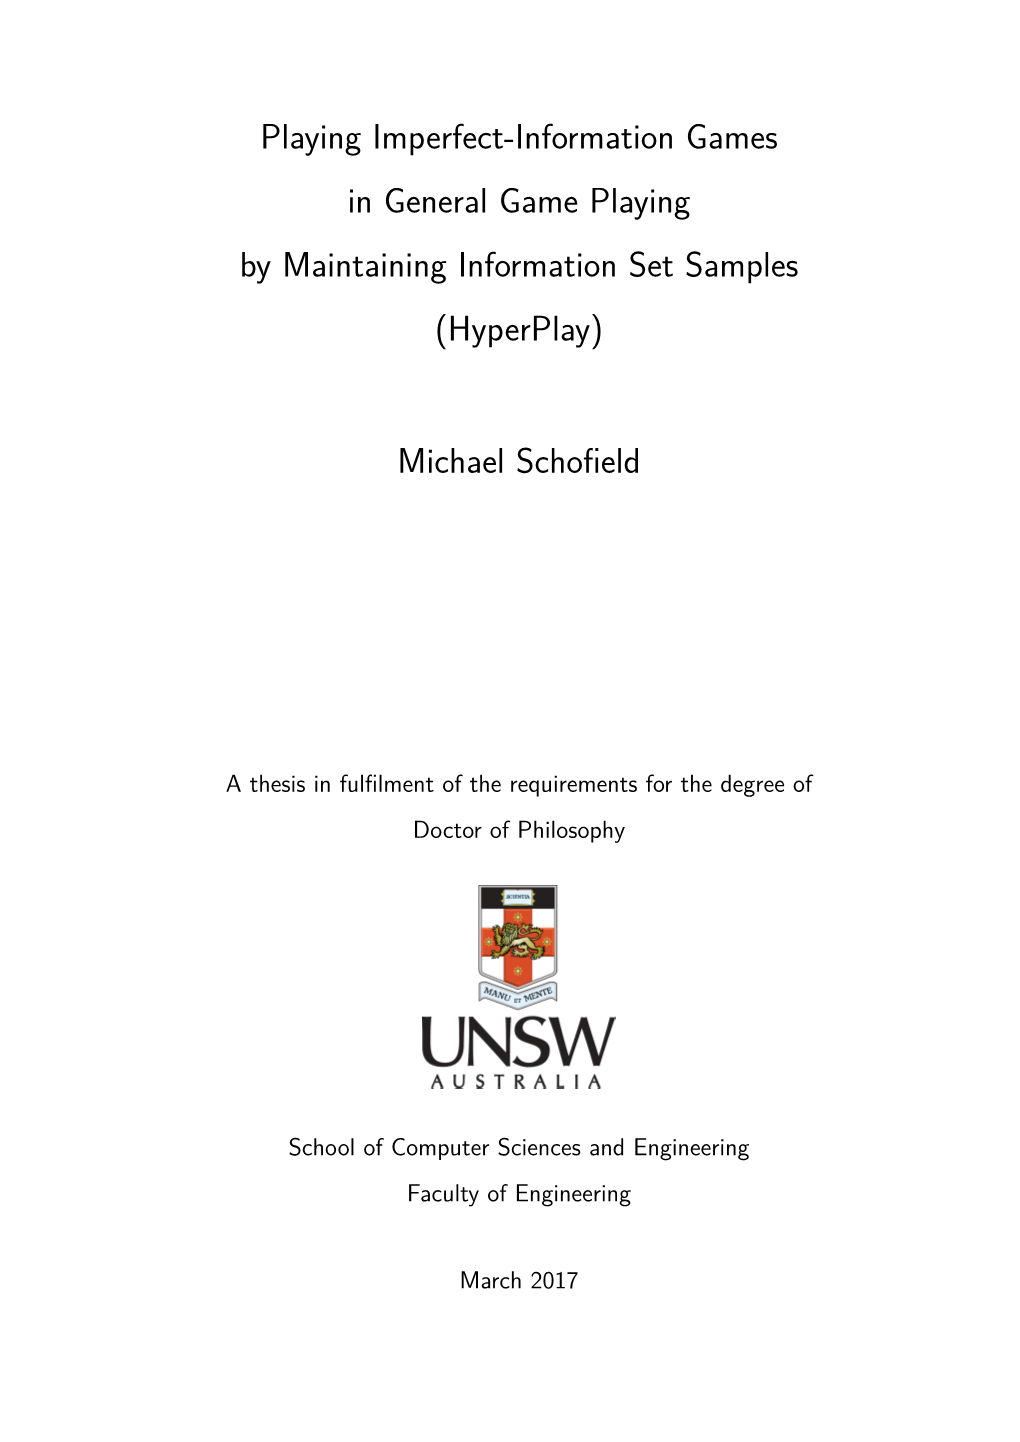 Playing Imperfect-Information Games in General Game Playing by Maintaining Information Set Samples (Hyperplay) Michael Schofield